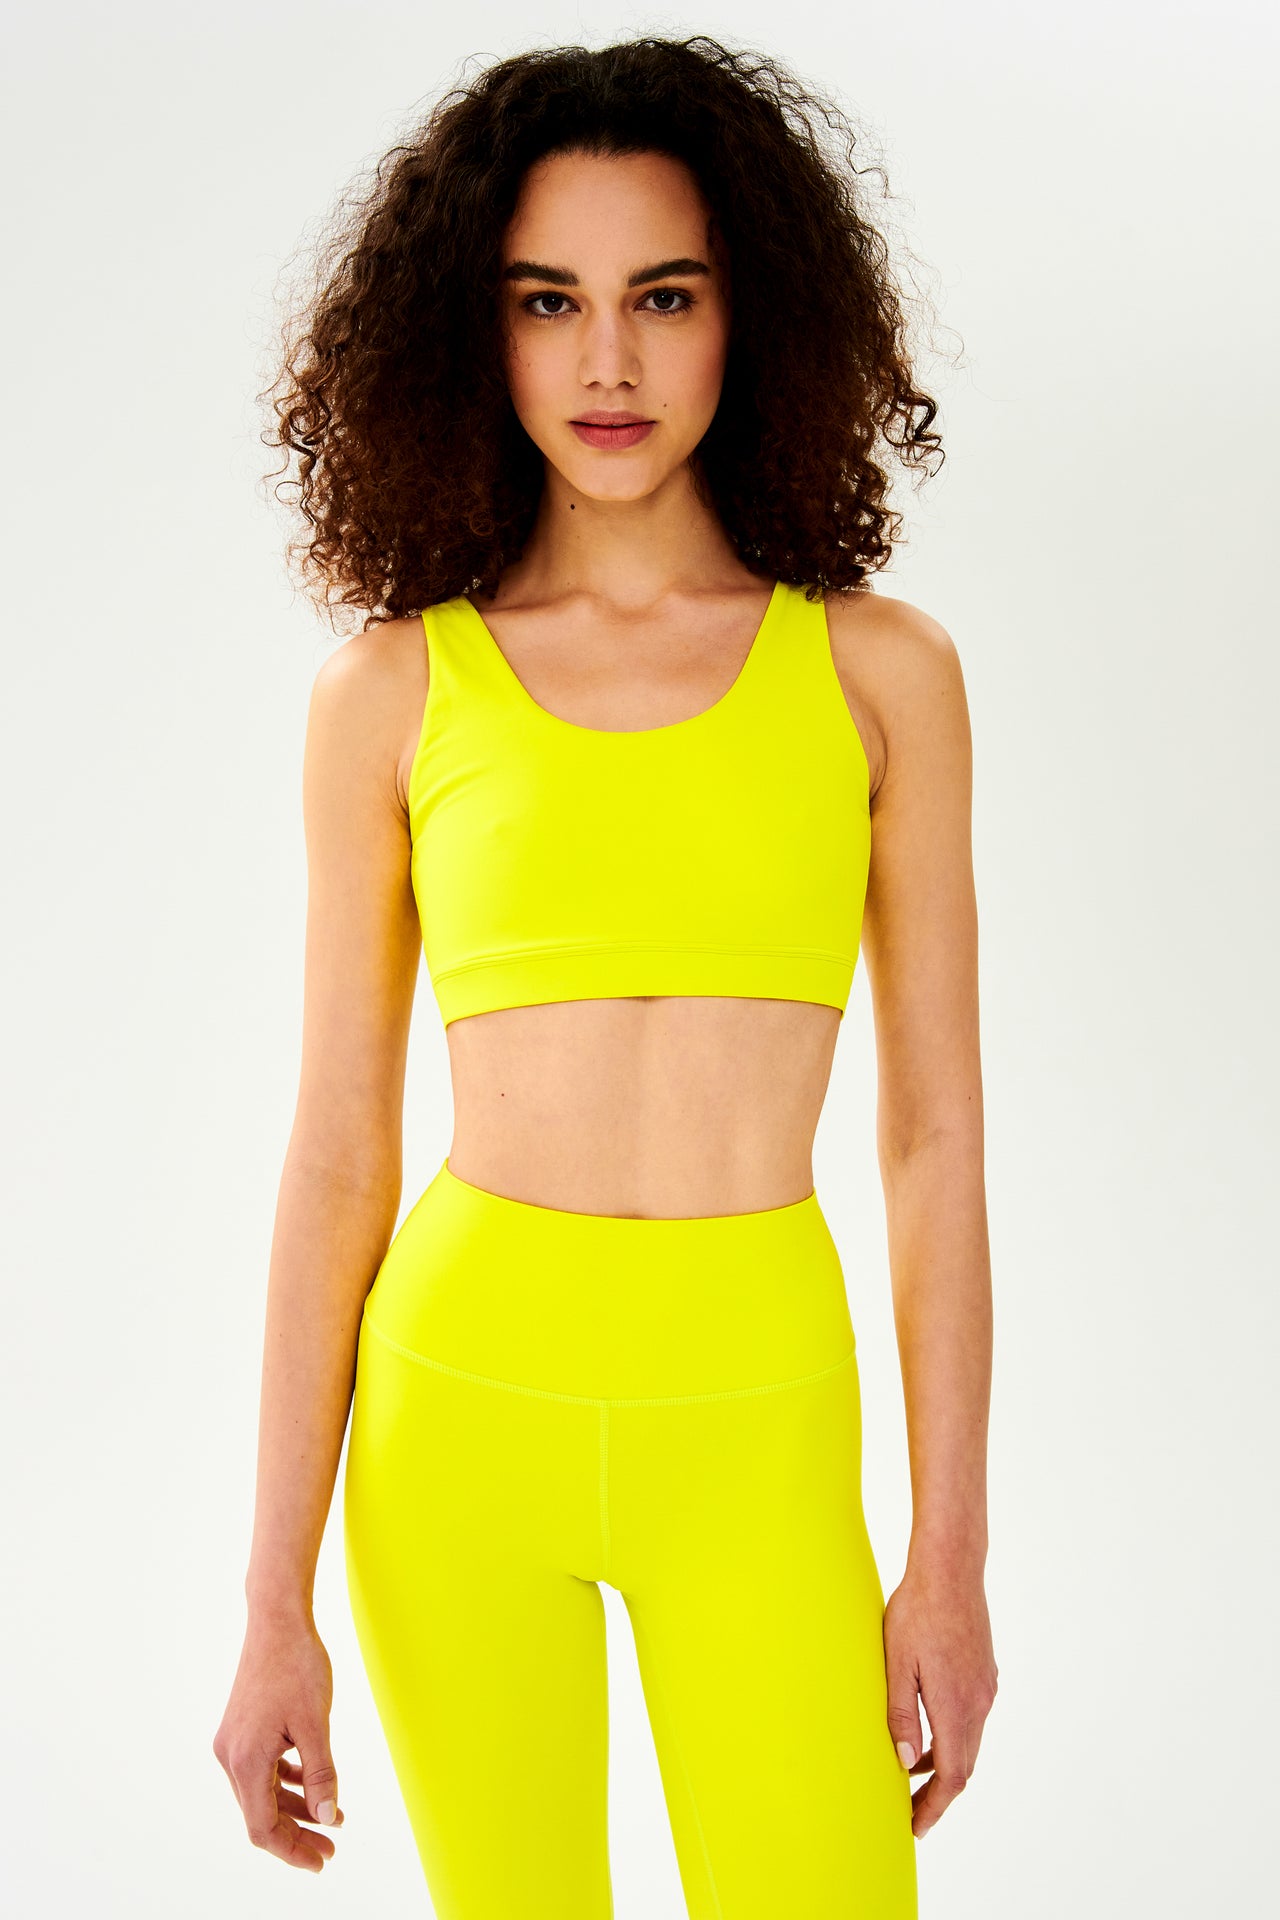 Front view of woman with curly dark wearing bright yellow bra with bright yellow leggings